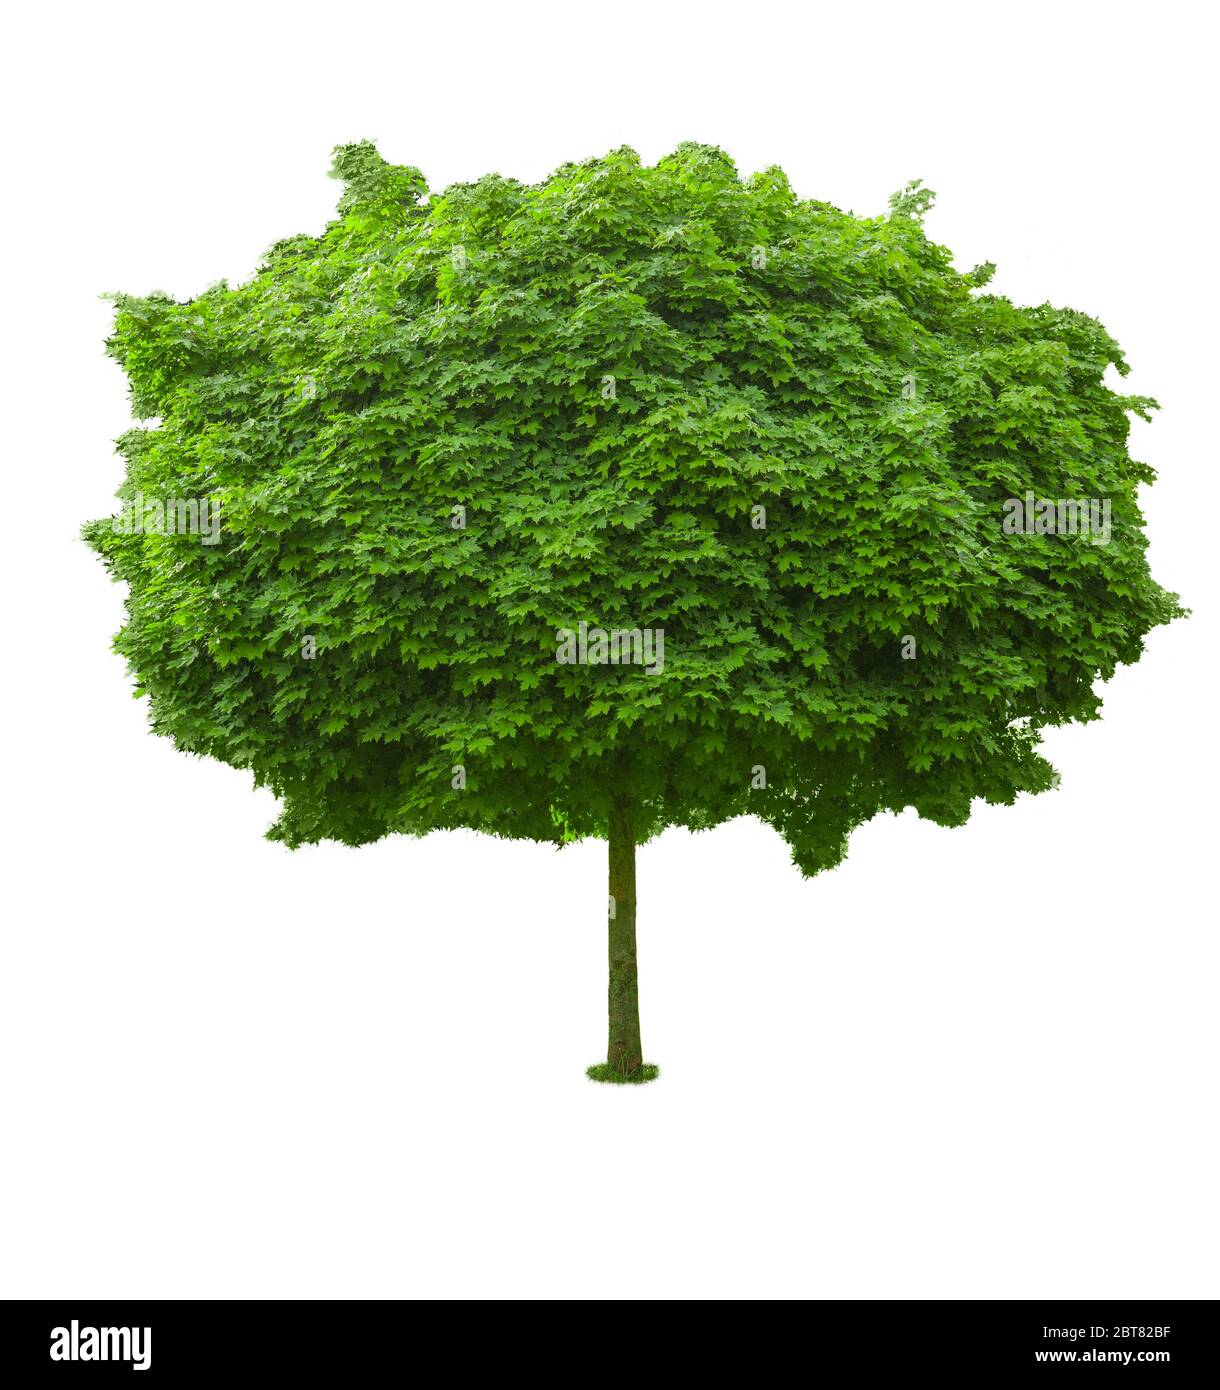 Green tree with dense foliage spherical shape isolated on white. Stock Photo